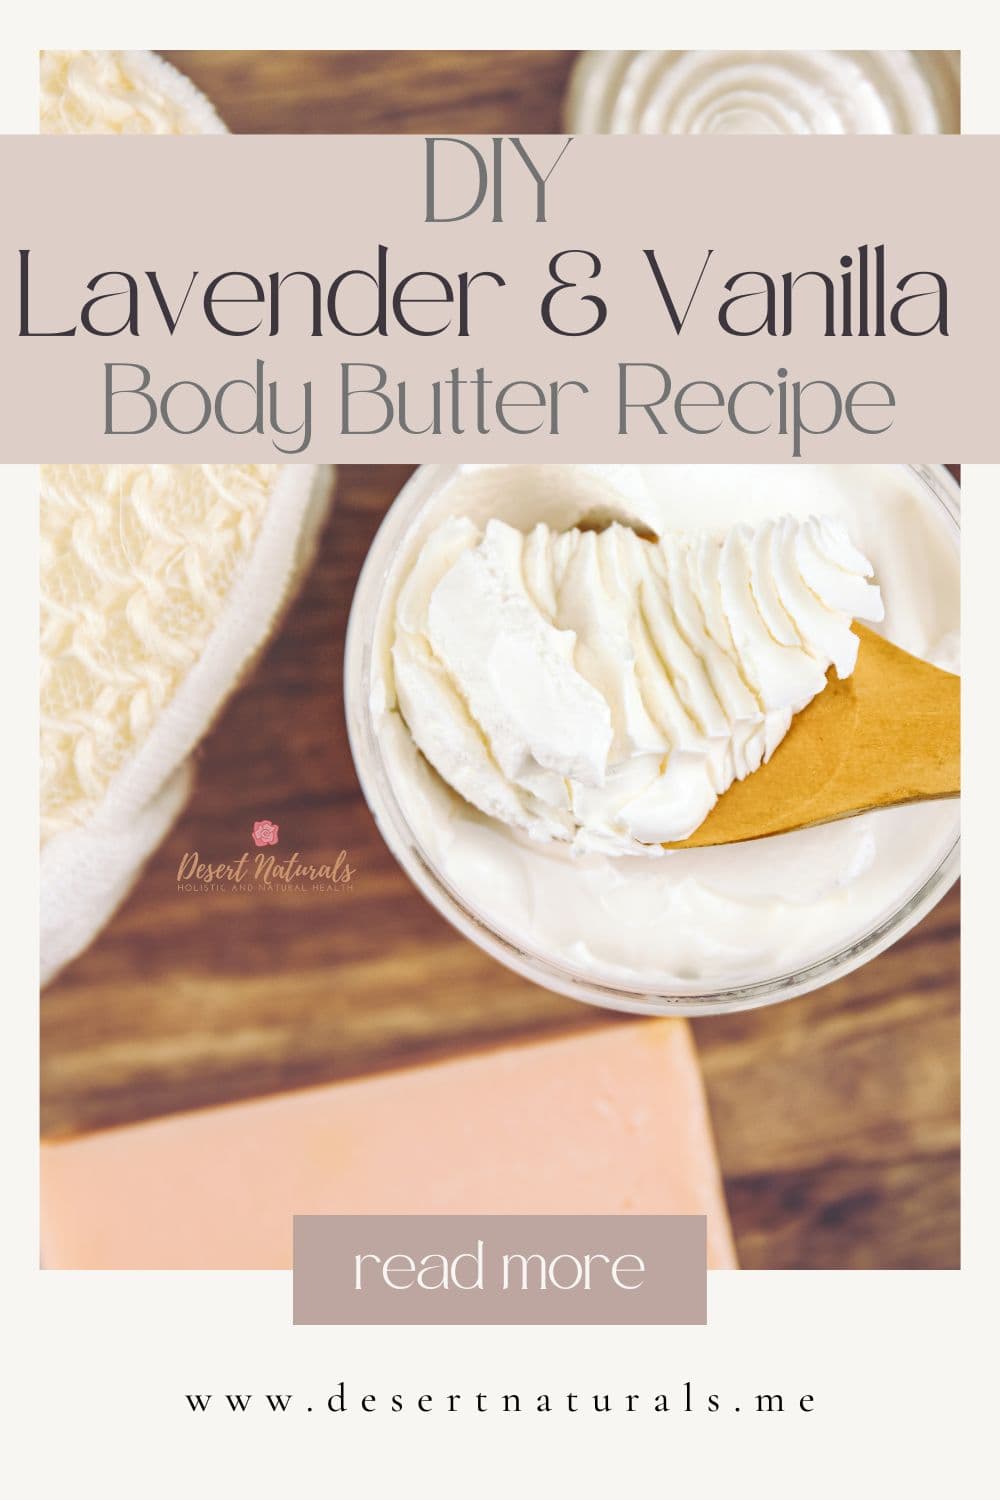 homemade body butter image with text DIY lavender and vanilla body butter recipe